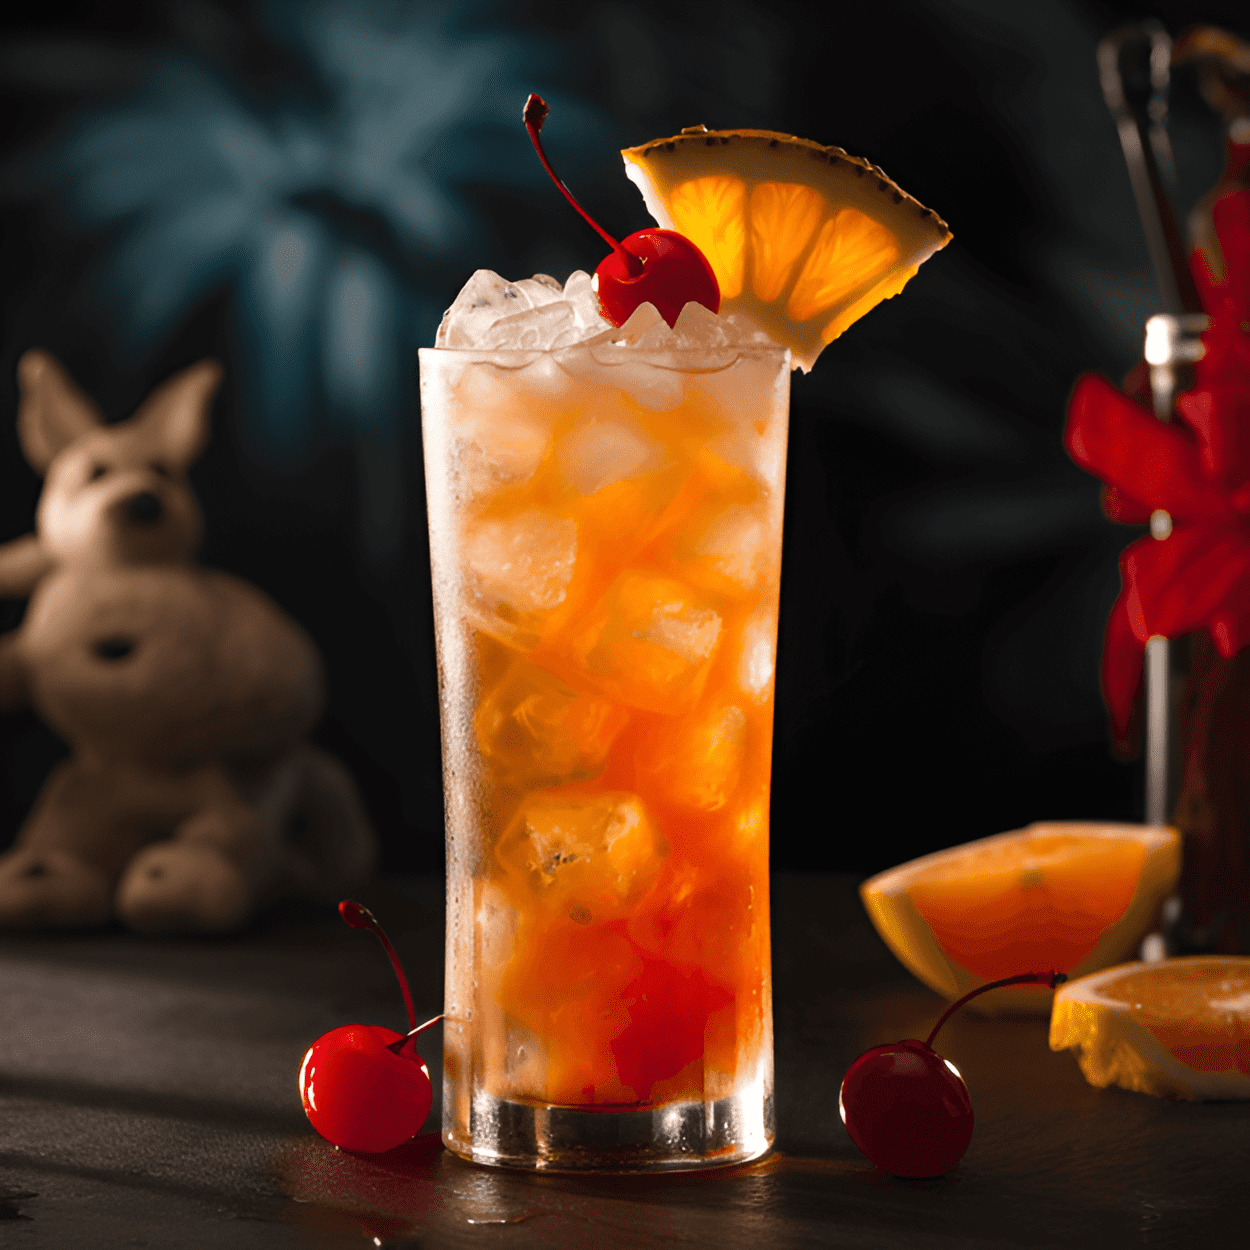 Black Superman Cocktail Recipe - The Black Superman is a powerful, full-bodied cocktail. It has a sweet, fruity taste with a strong alcoholic undertone. The combination of tropical fruit flavors and dark rum gives it a unique, rich flavor profile.